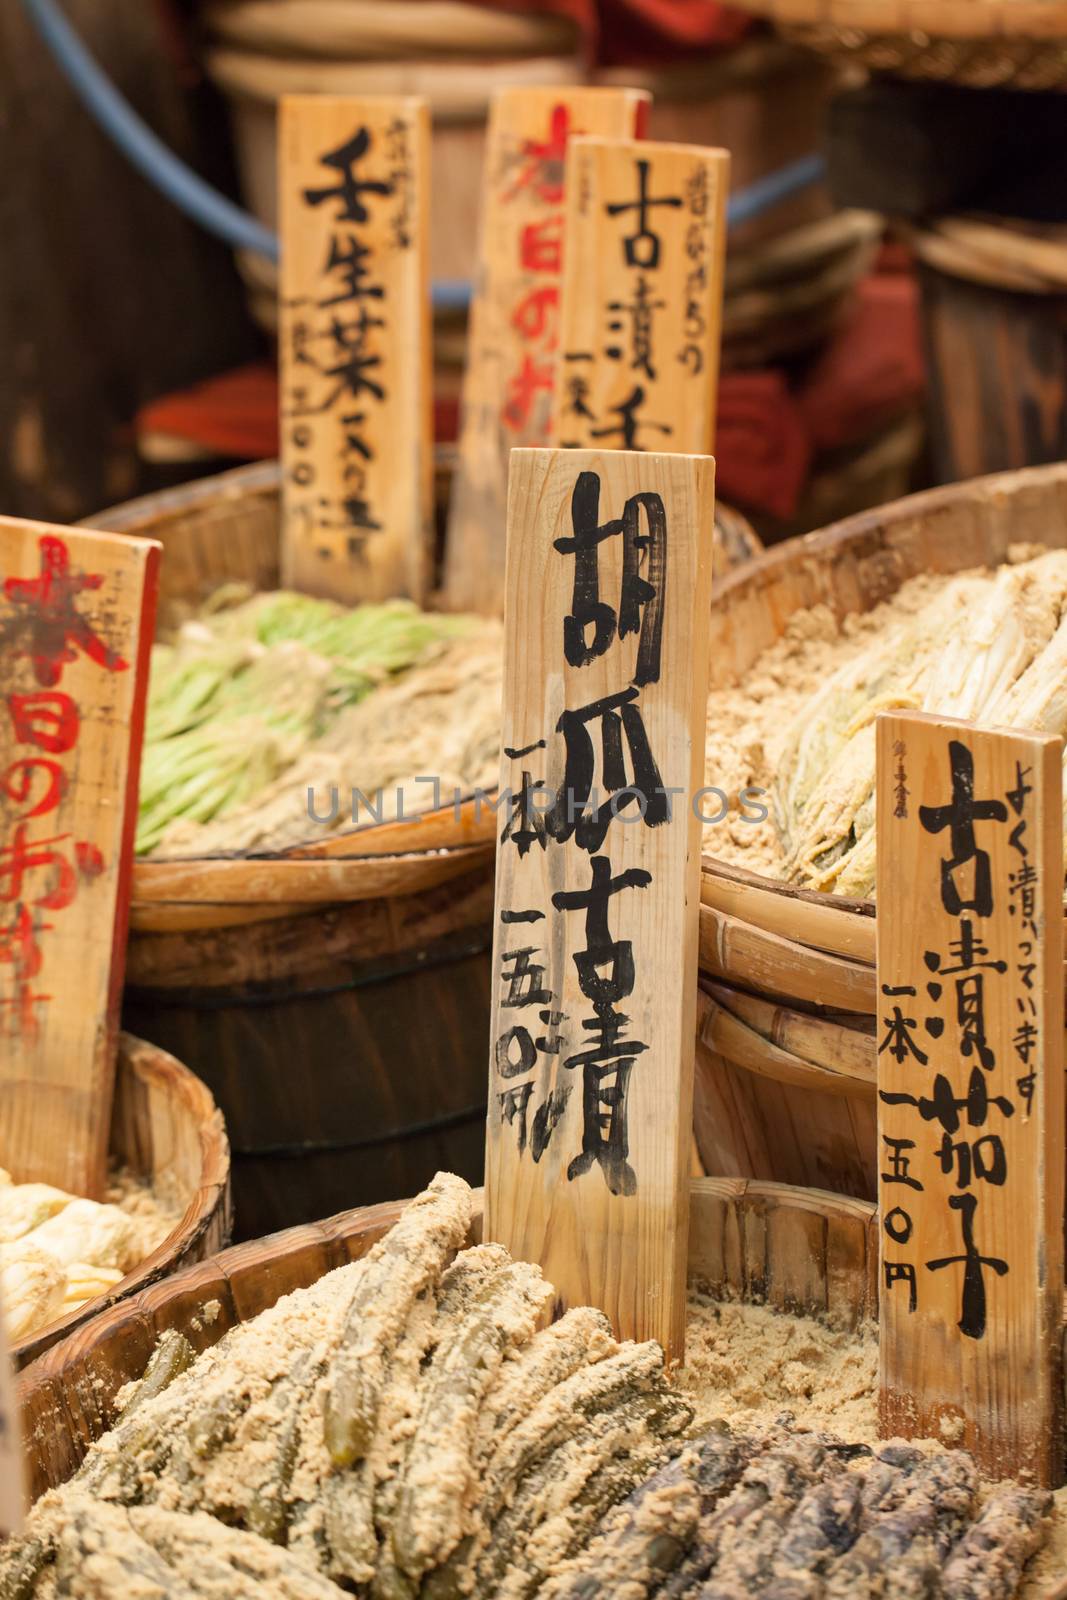 Traditional market in Japan. 